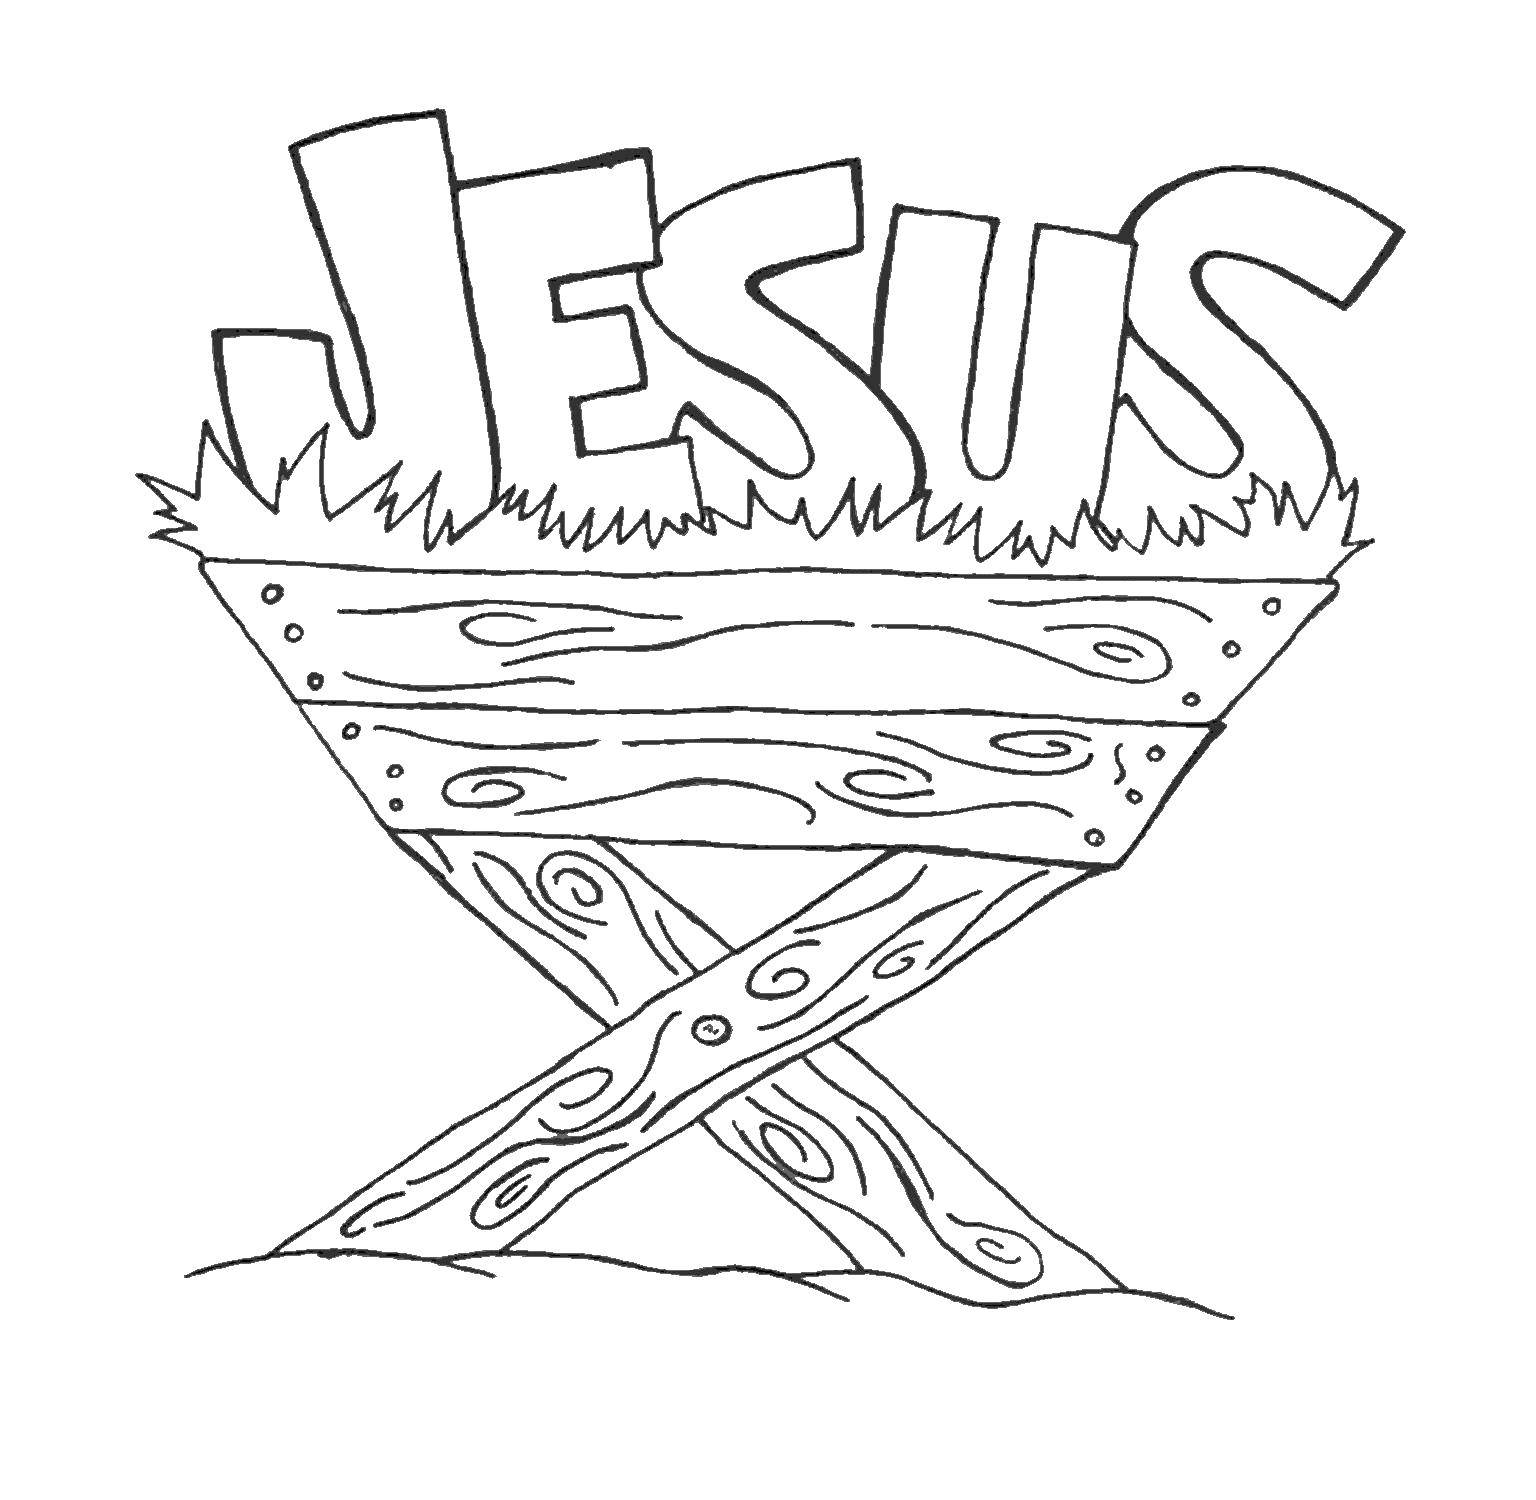 Coloring The inscription Jesus. Category Religion. Tags:  Jesus, the Bible.